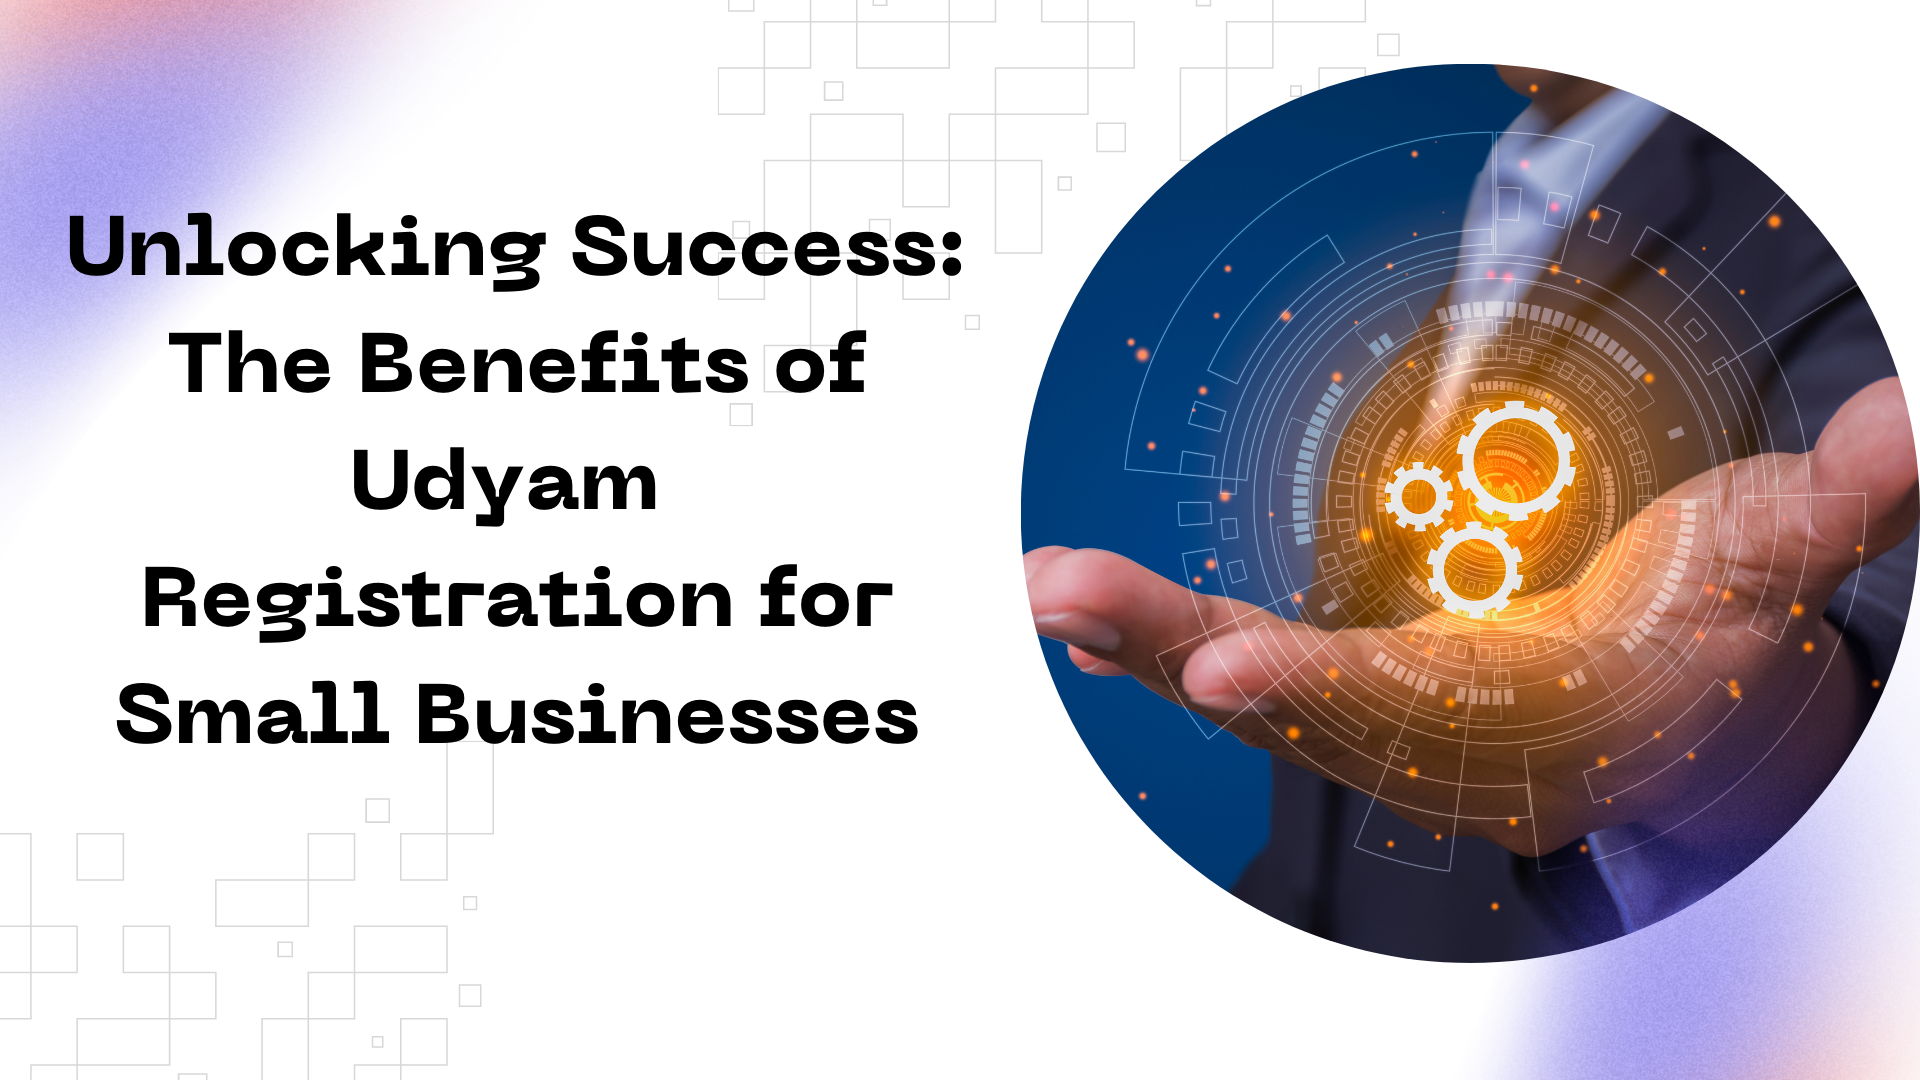 Unlocking Success The Benefits of Udyam Registration for Small Businesses